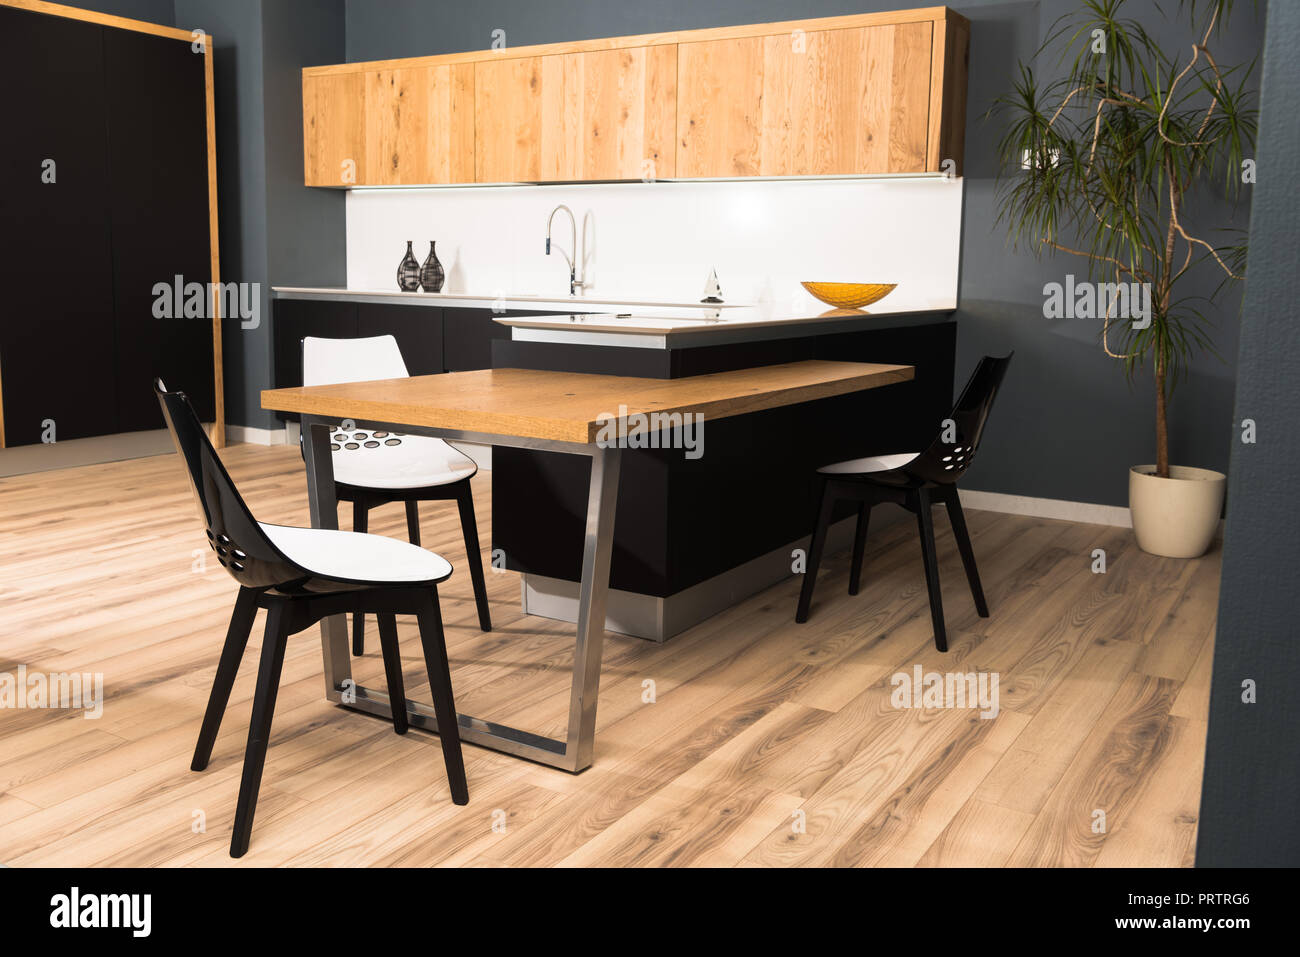 interior of modern clean light kitchen with comfortable furniture and potted plant Stock Photo